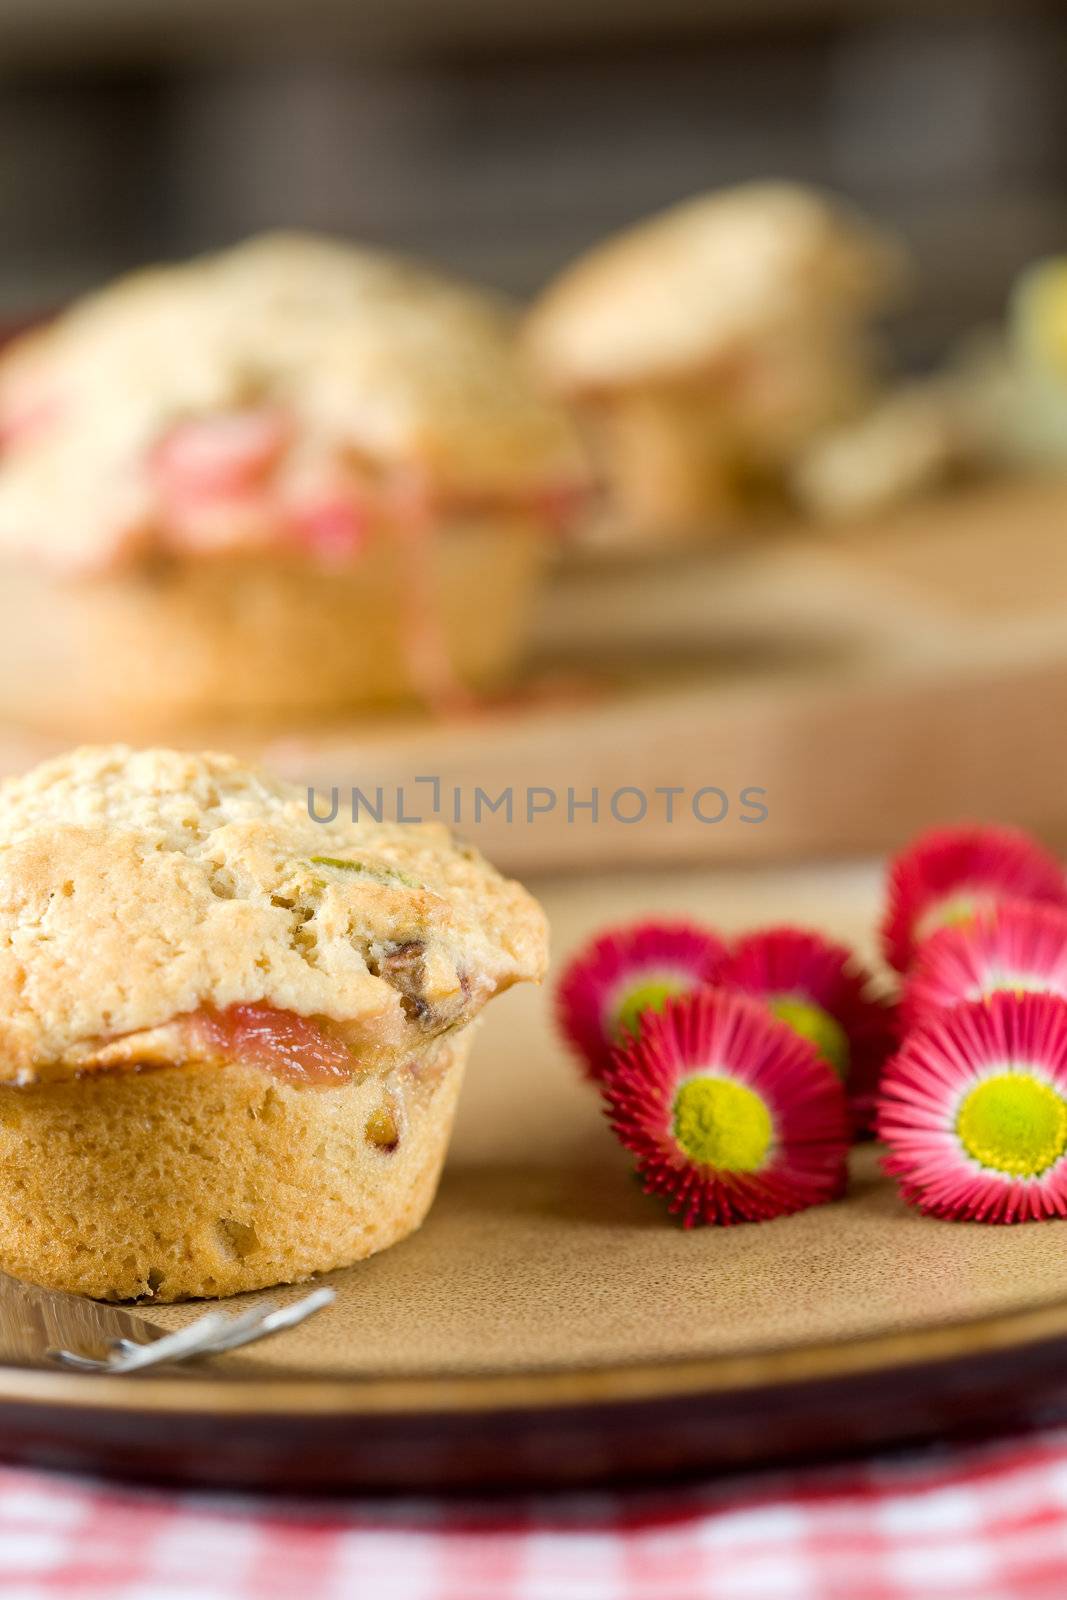 Delicious muffin filled with pistachio and rhubarb